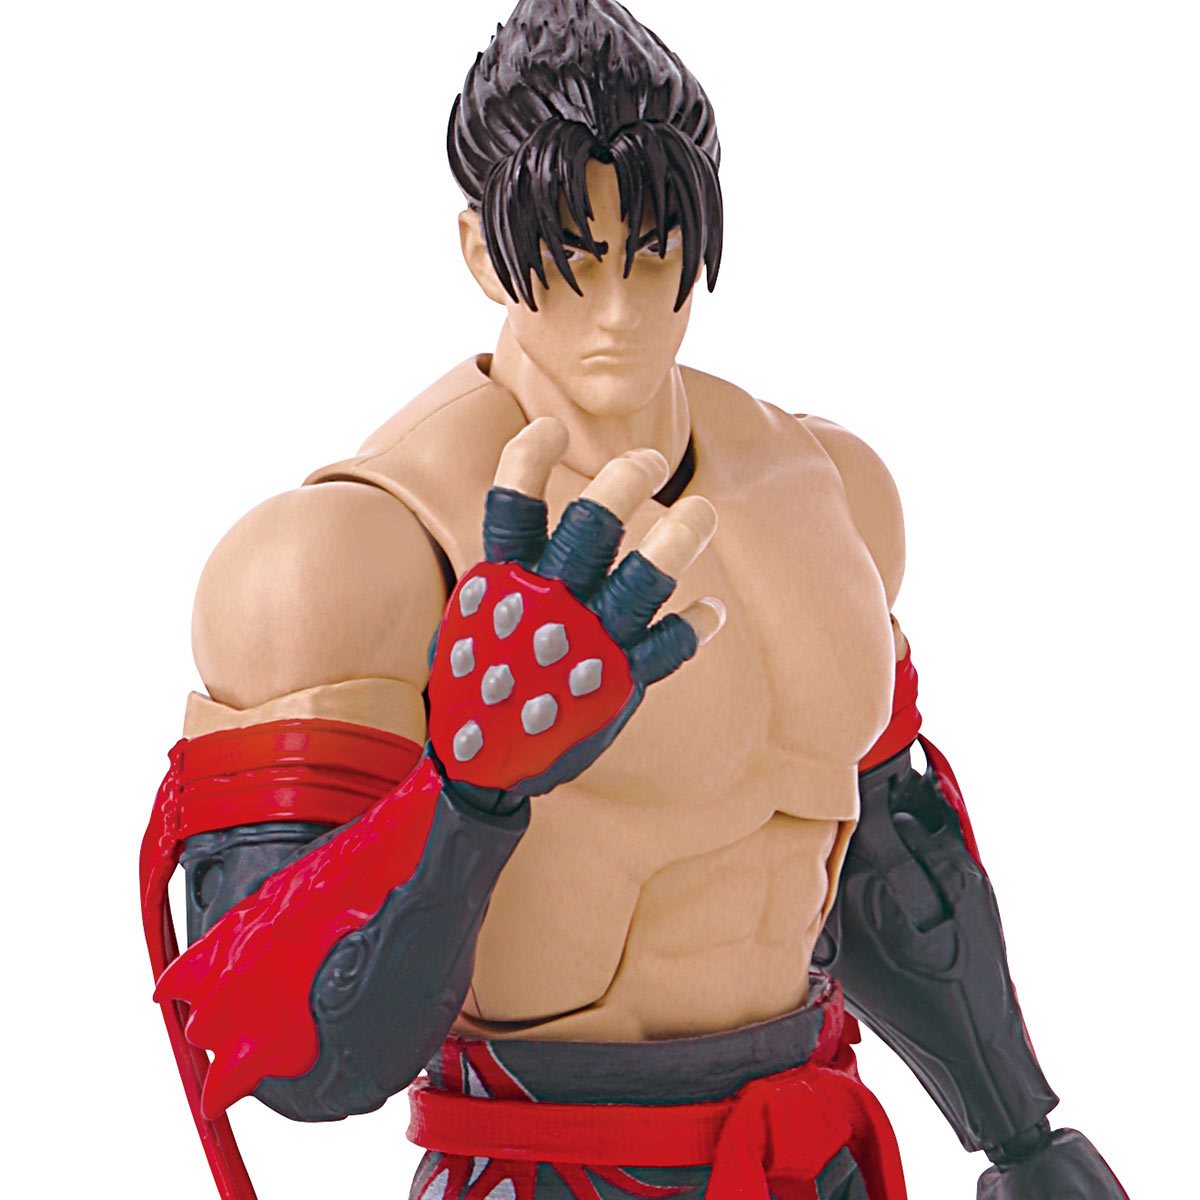 Game Dimensions Tekken 8 Jin Kazama Round 2 Action Figure - 6.5in Tall Close Up Face